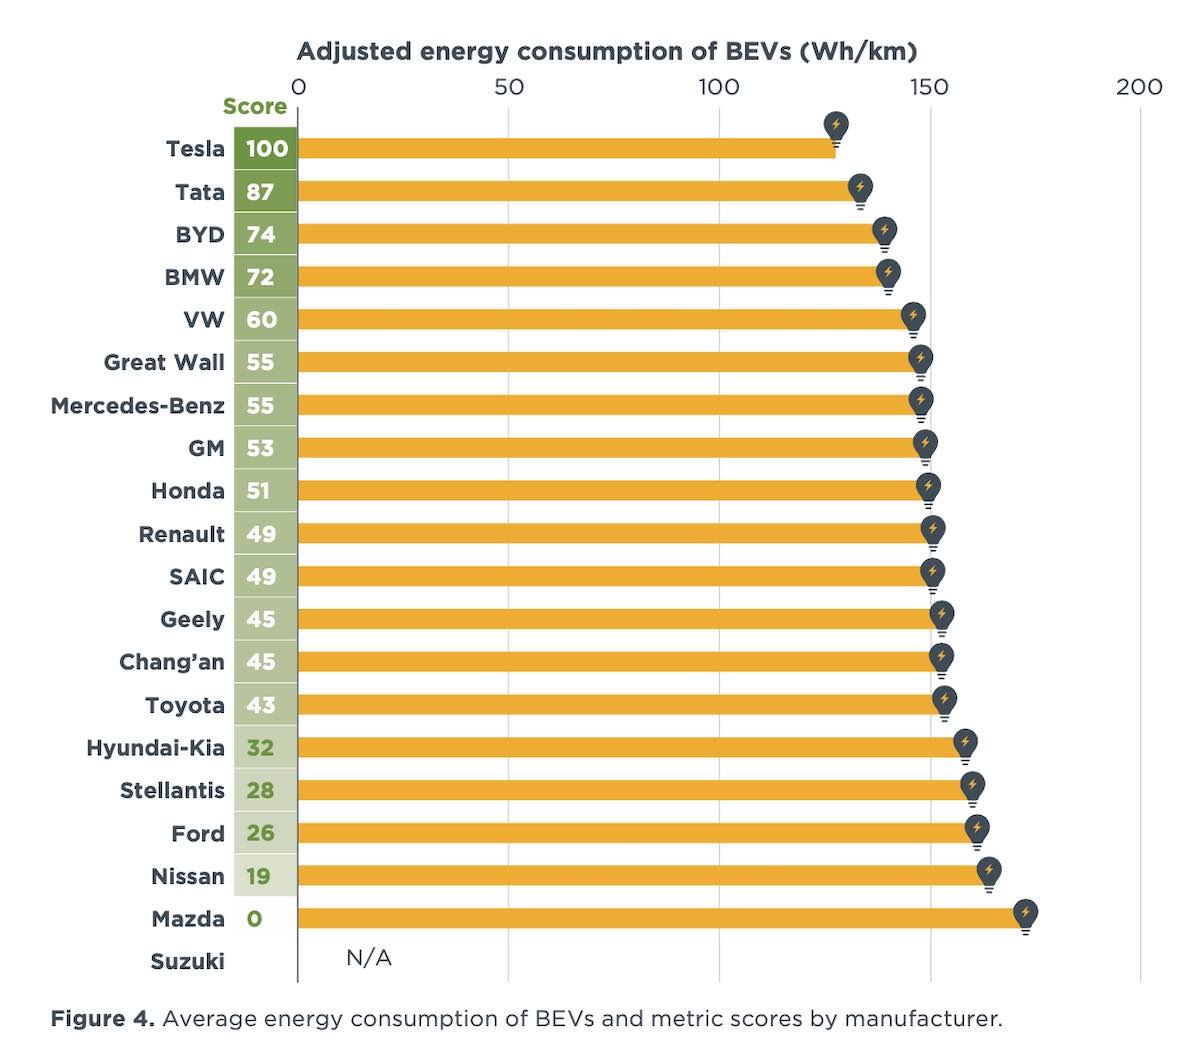 Average energy consumption of BEVs and metric scores by manufacturer